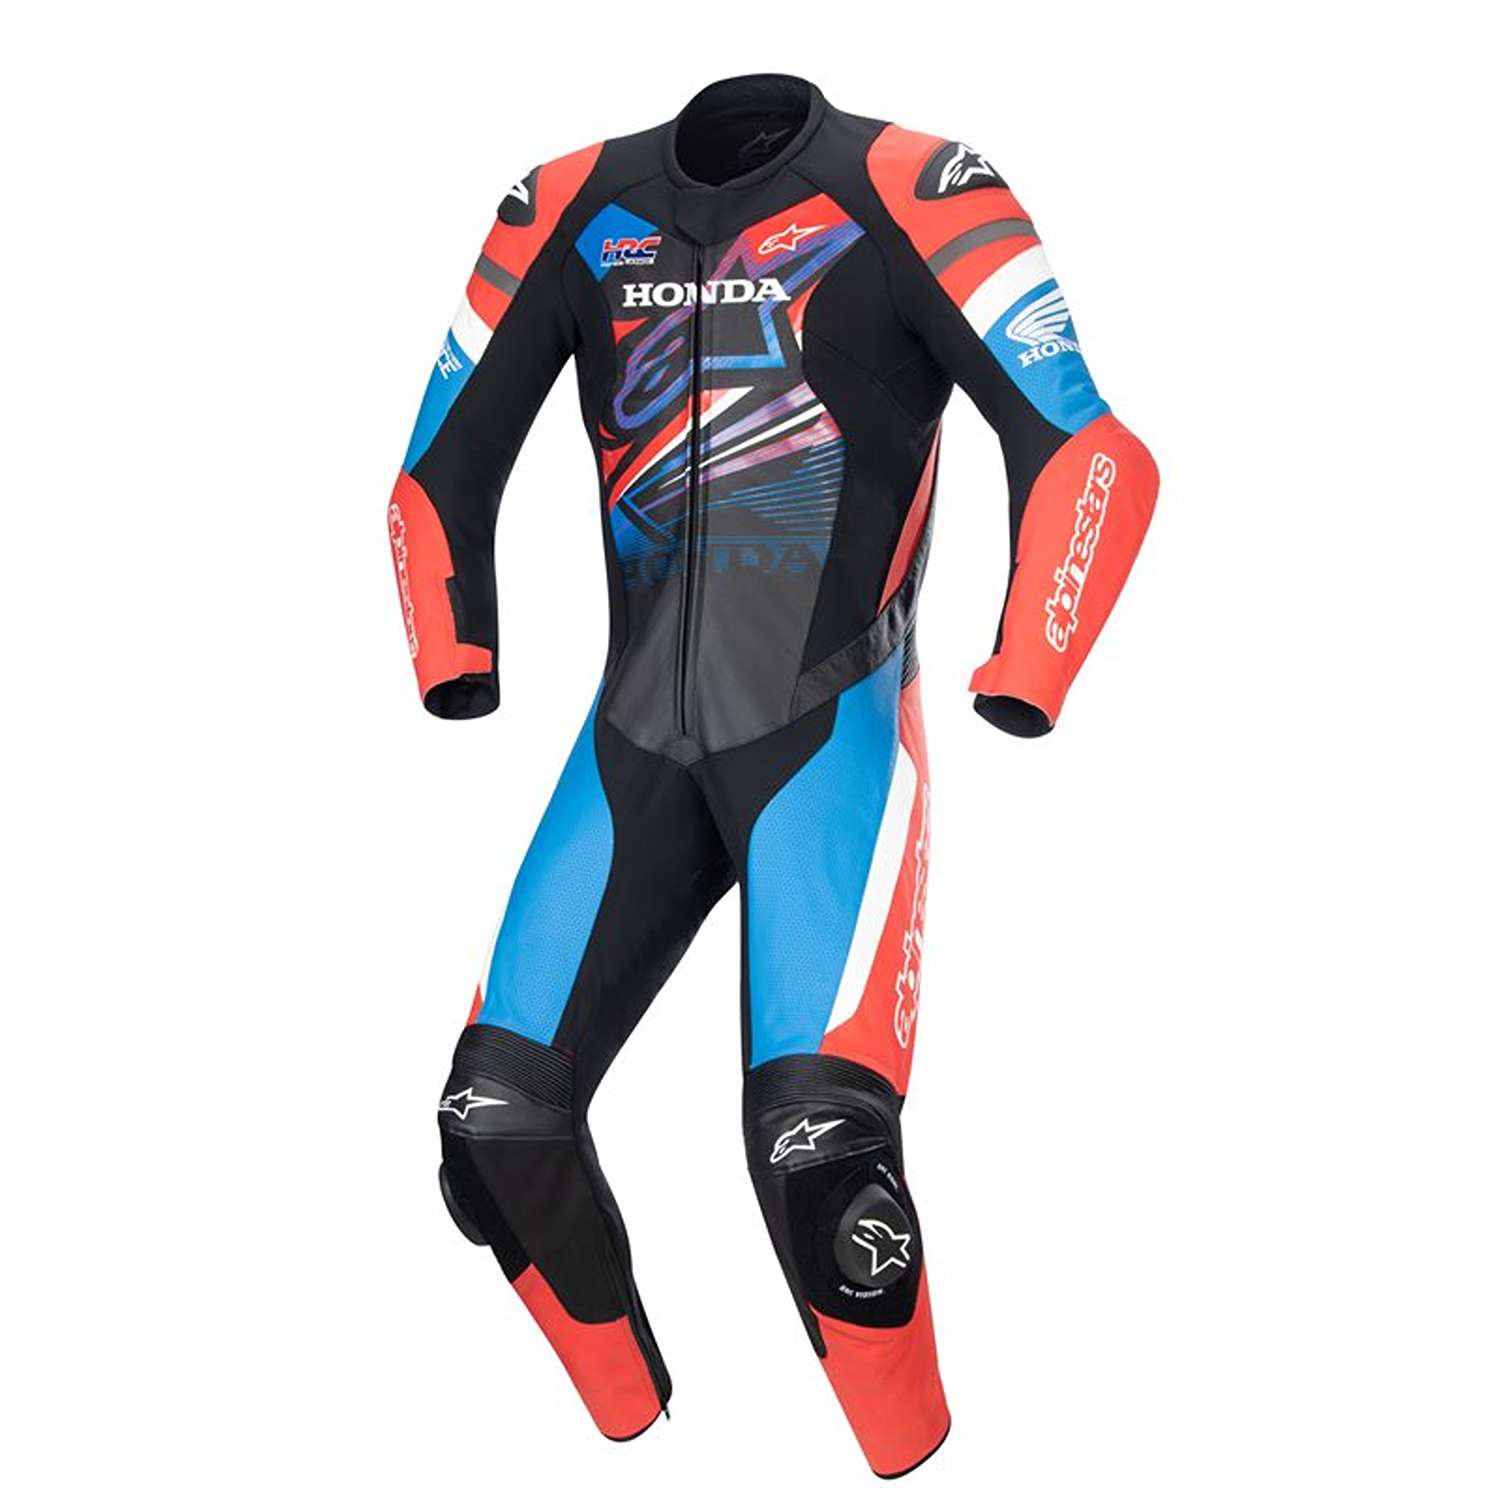 Image of Alpinestars Honda Gp Force Leather Suit Black Bright Red Blue Taille 56